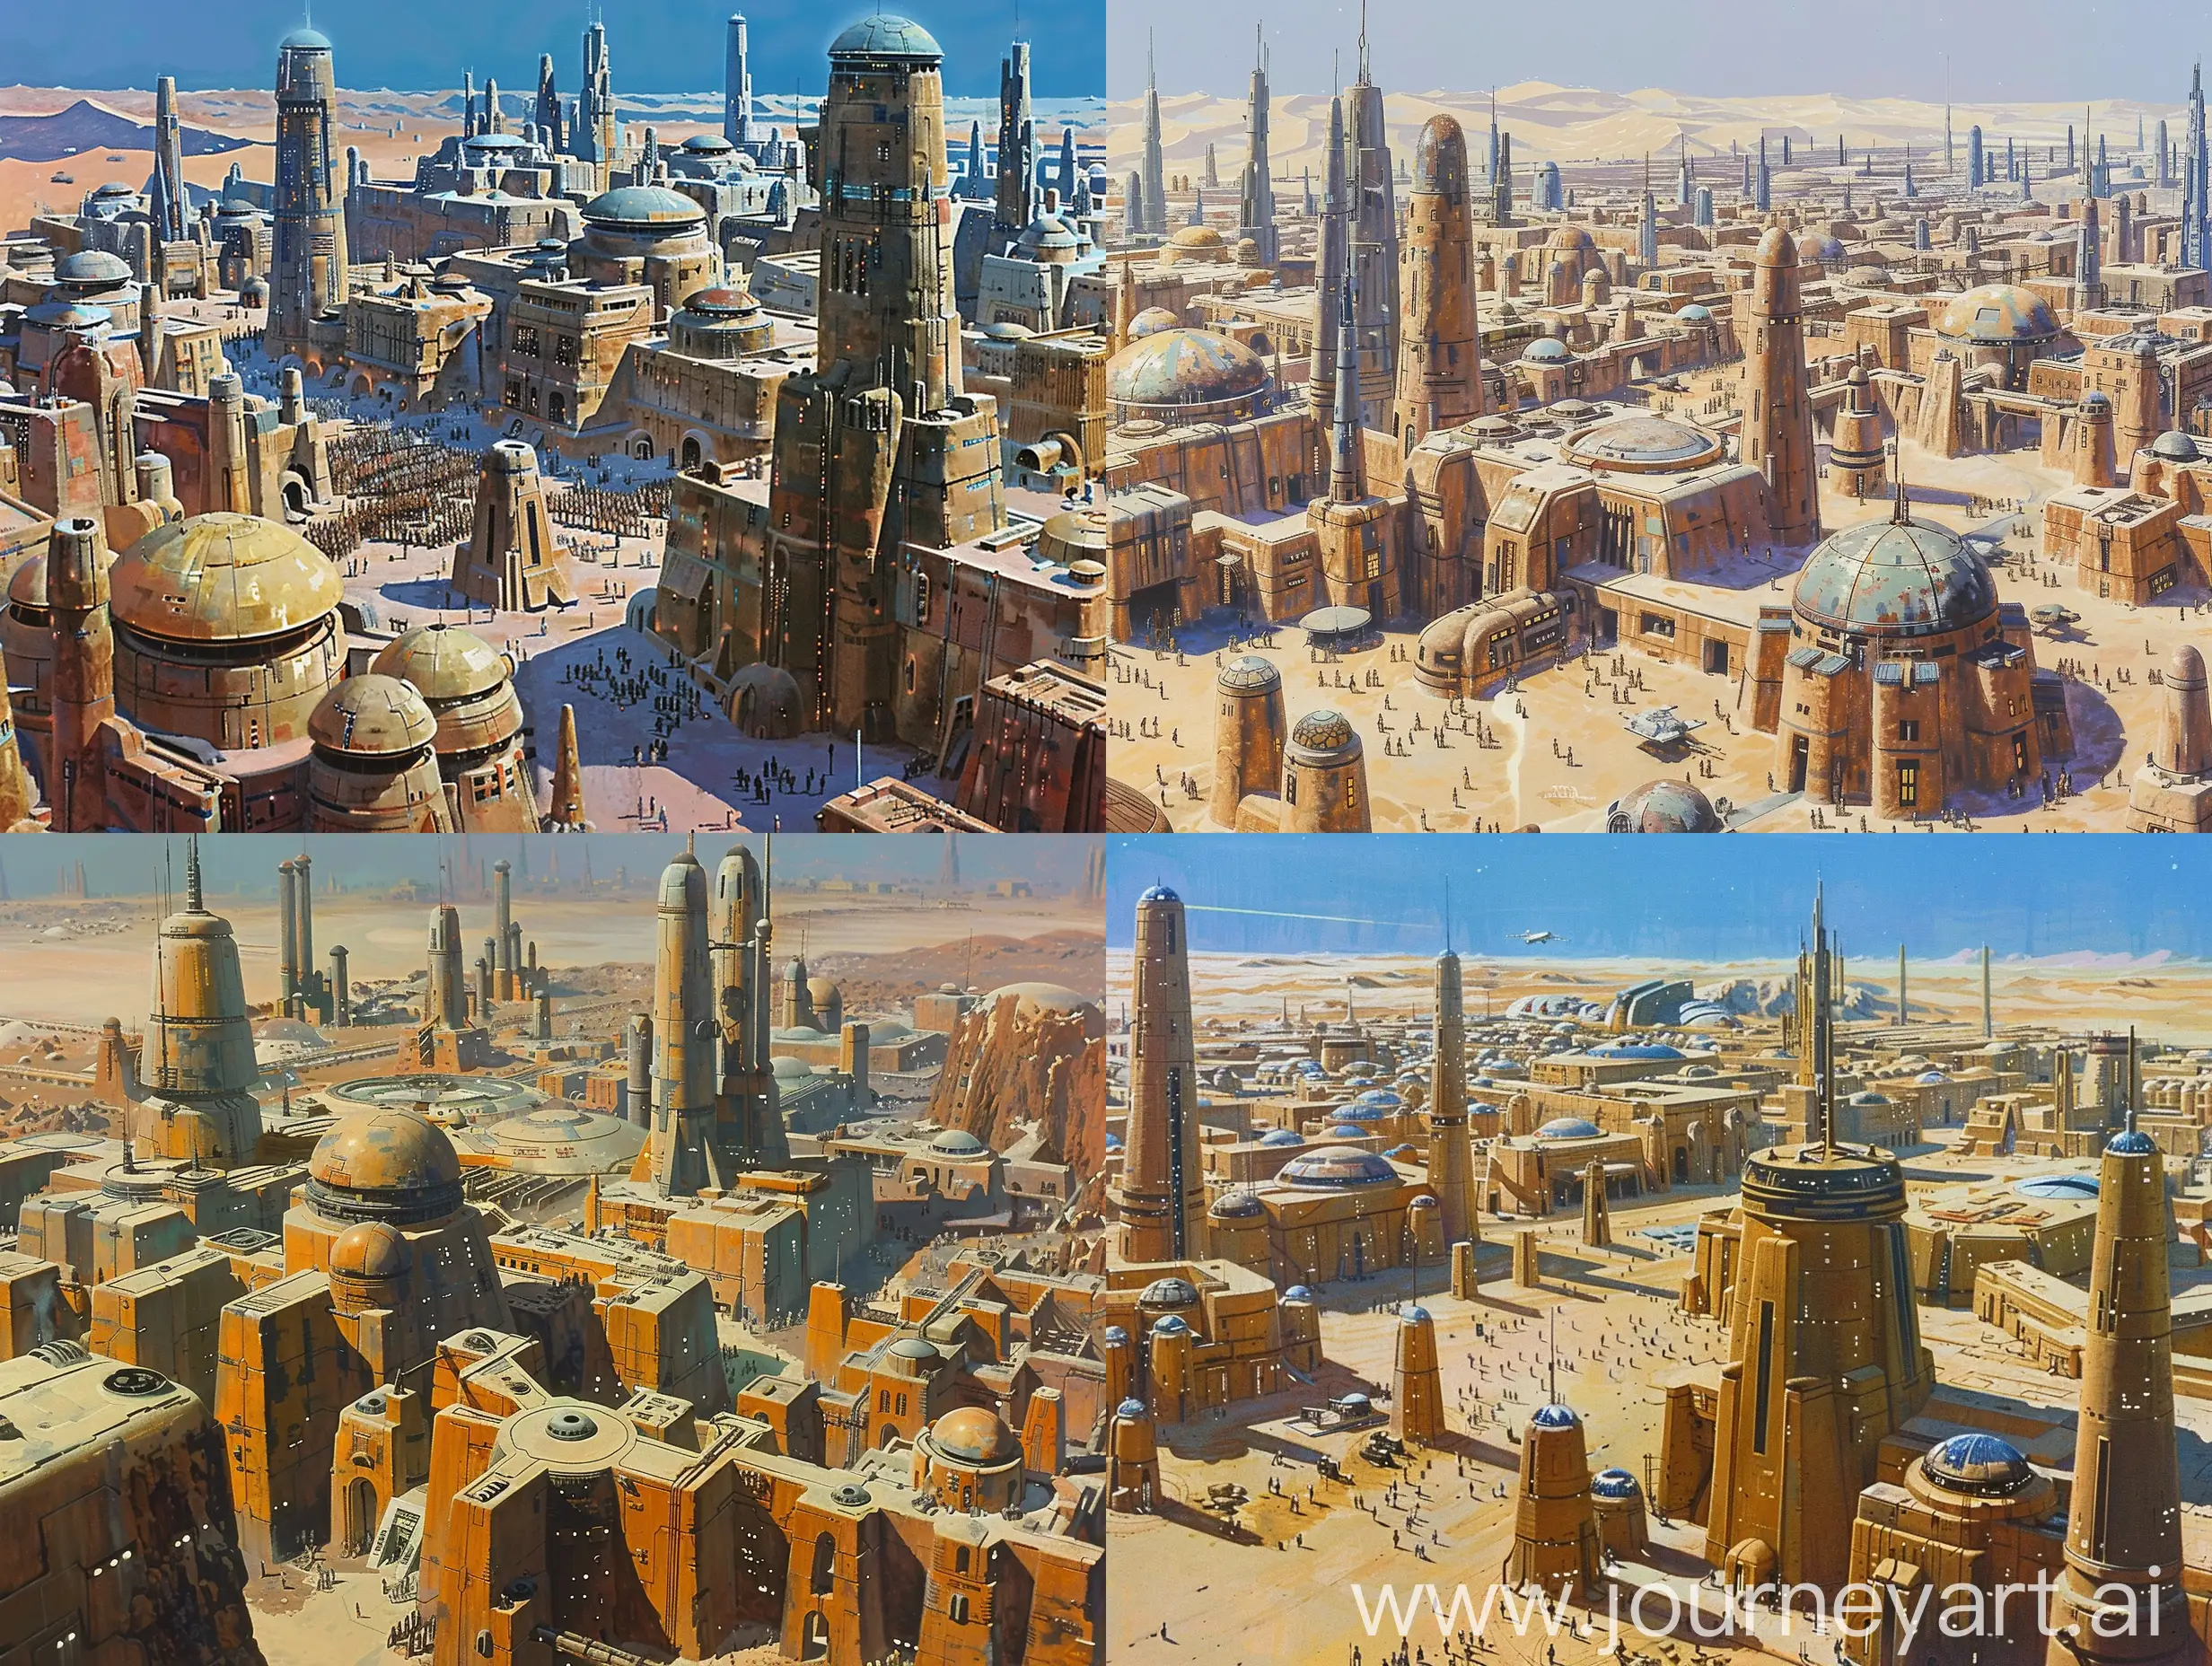 A large desert metropolis on Tatooine painted by a Ralph McQuarrie. A sprawling desert city with high towers and domed buildings. in retro science fiction style. in color. ornate buildings. 